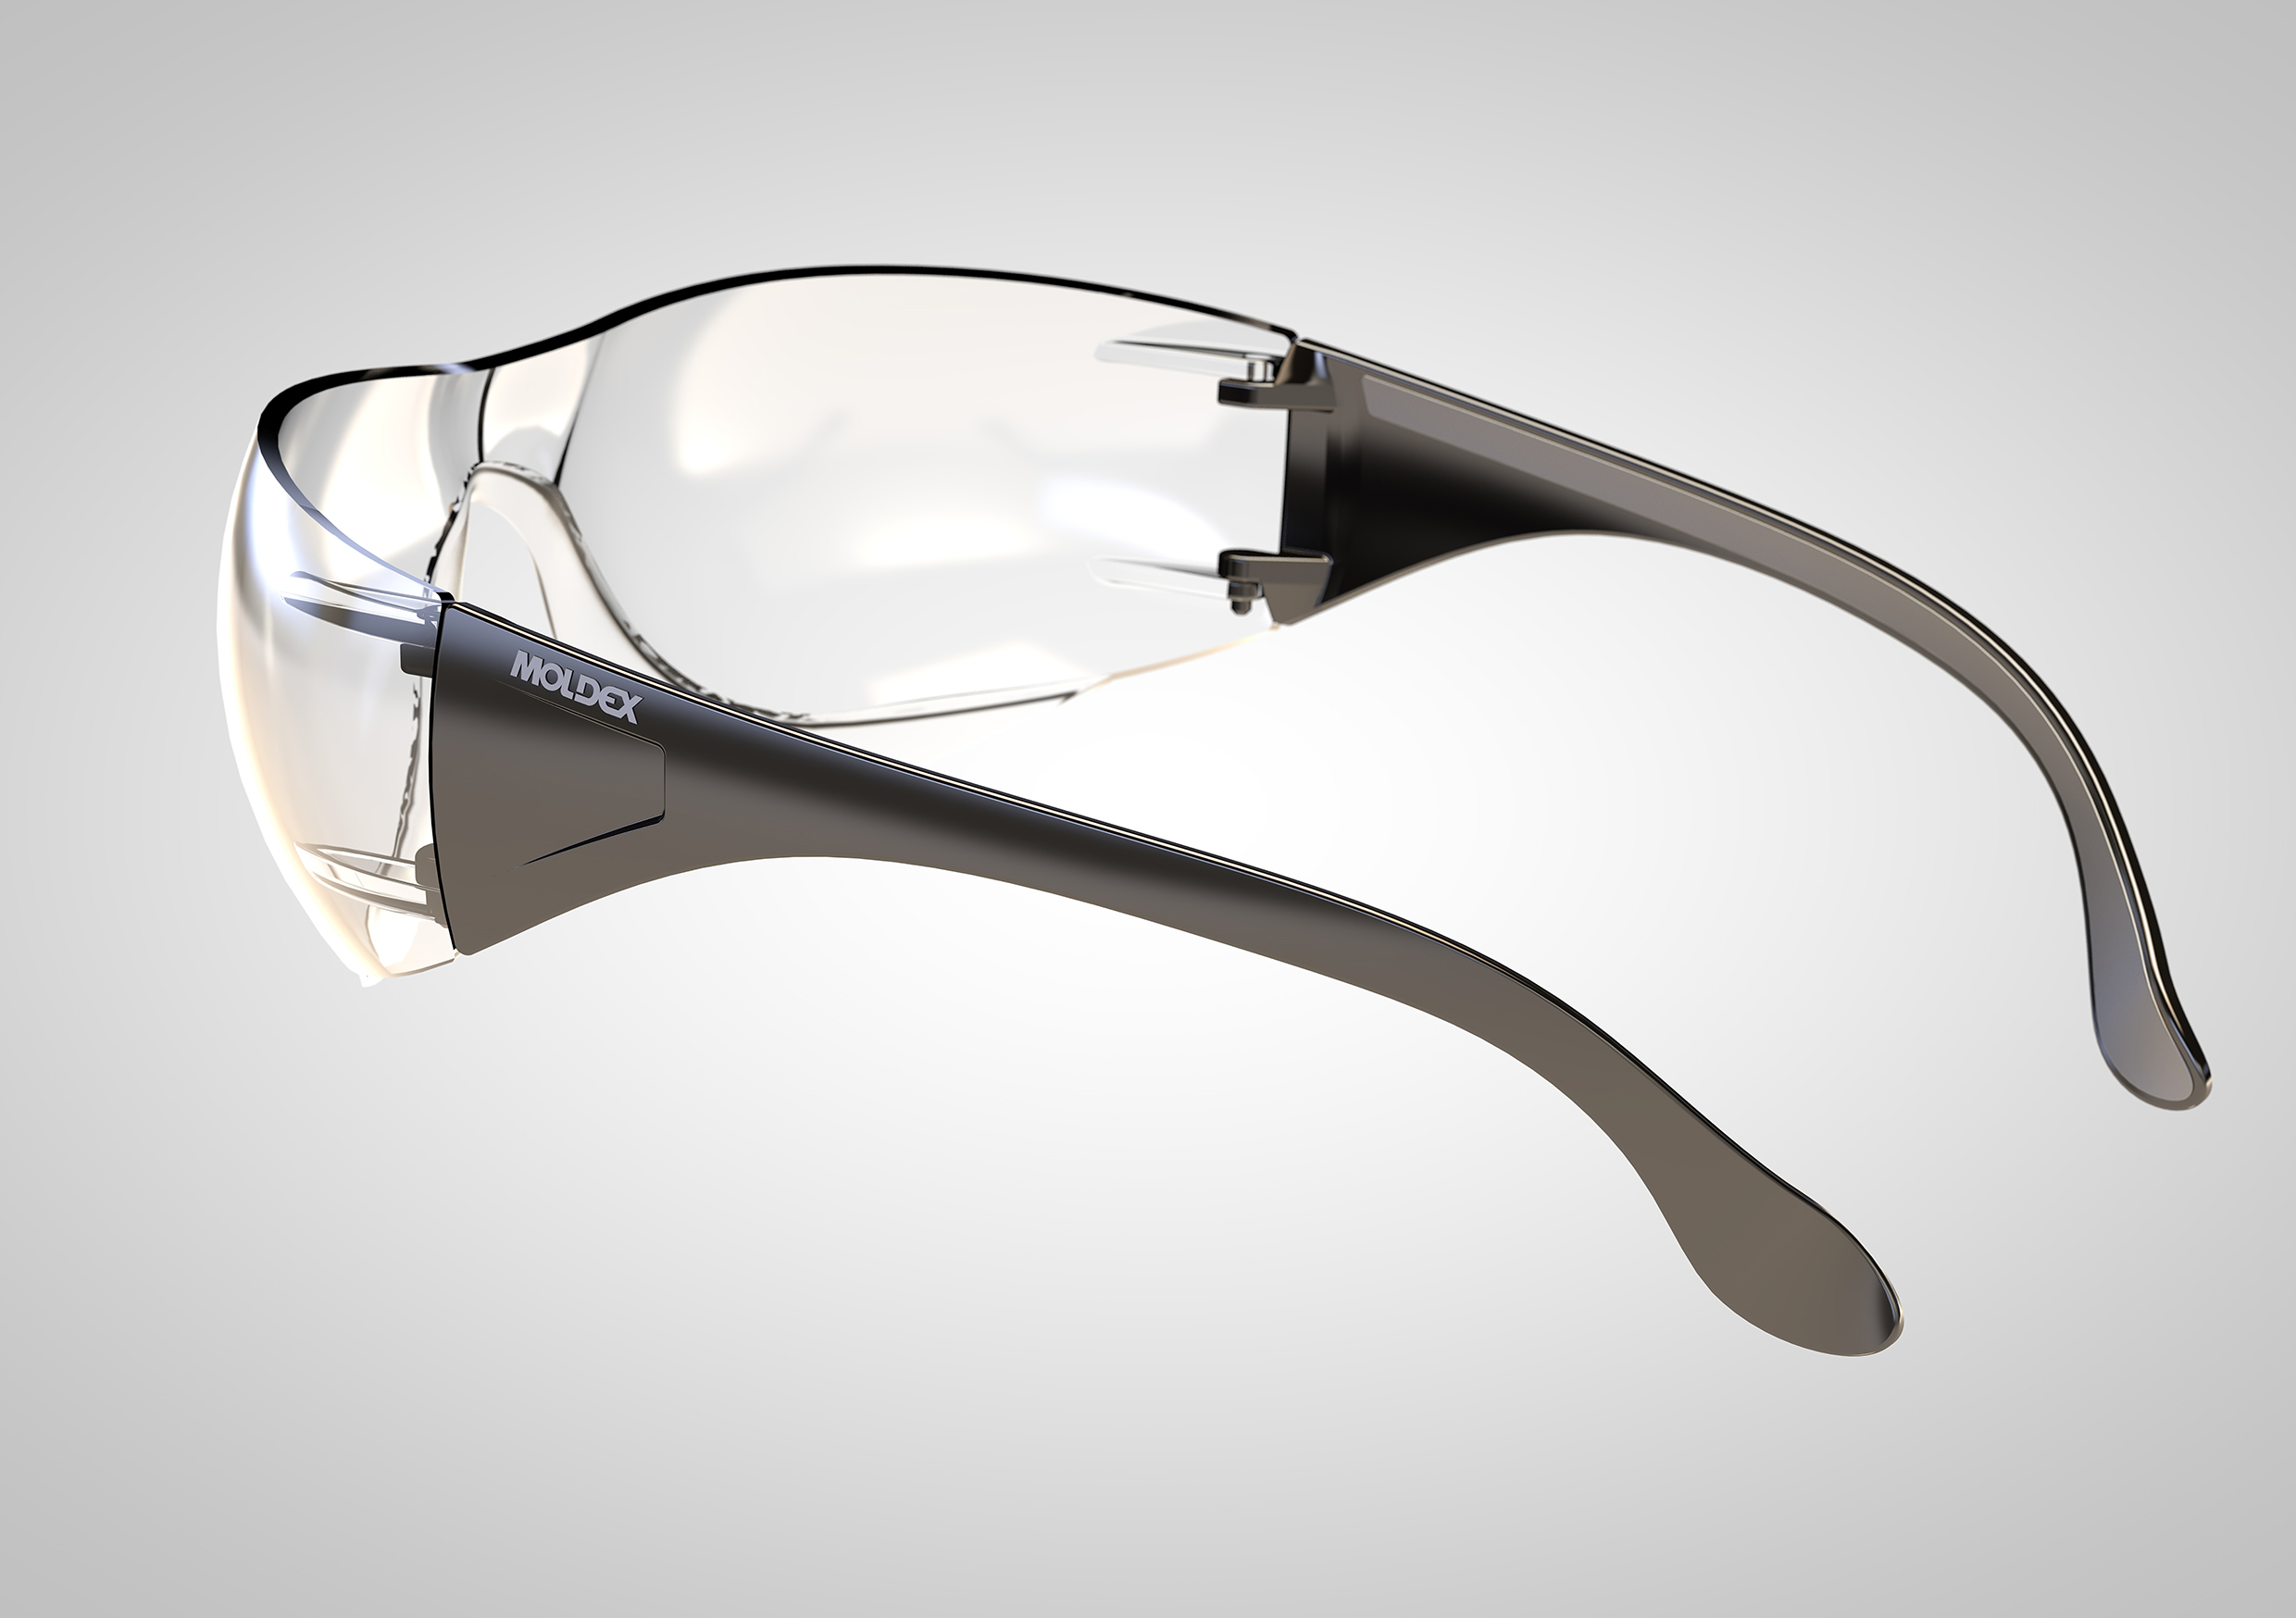 IONDESIGN Moldex safety goggles product design photo Rendering